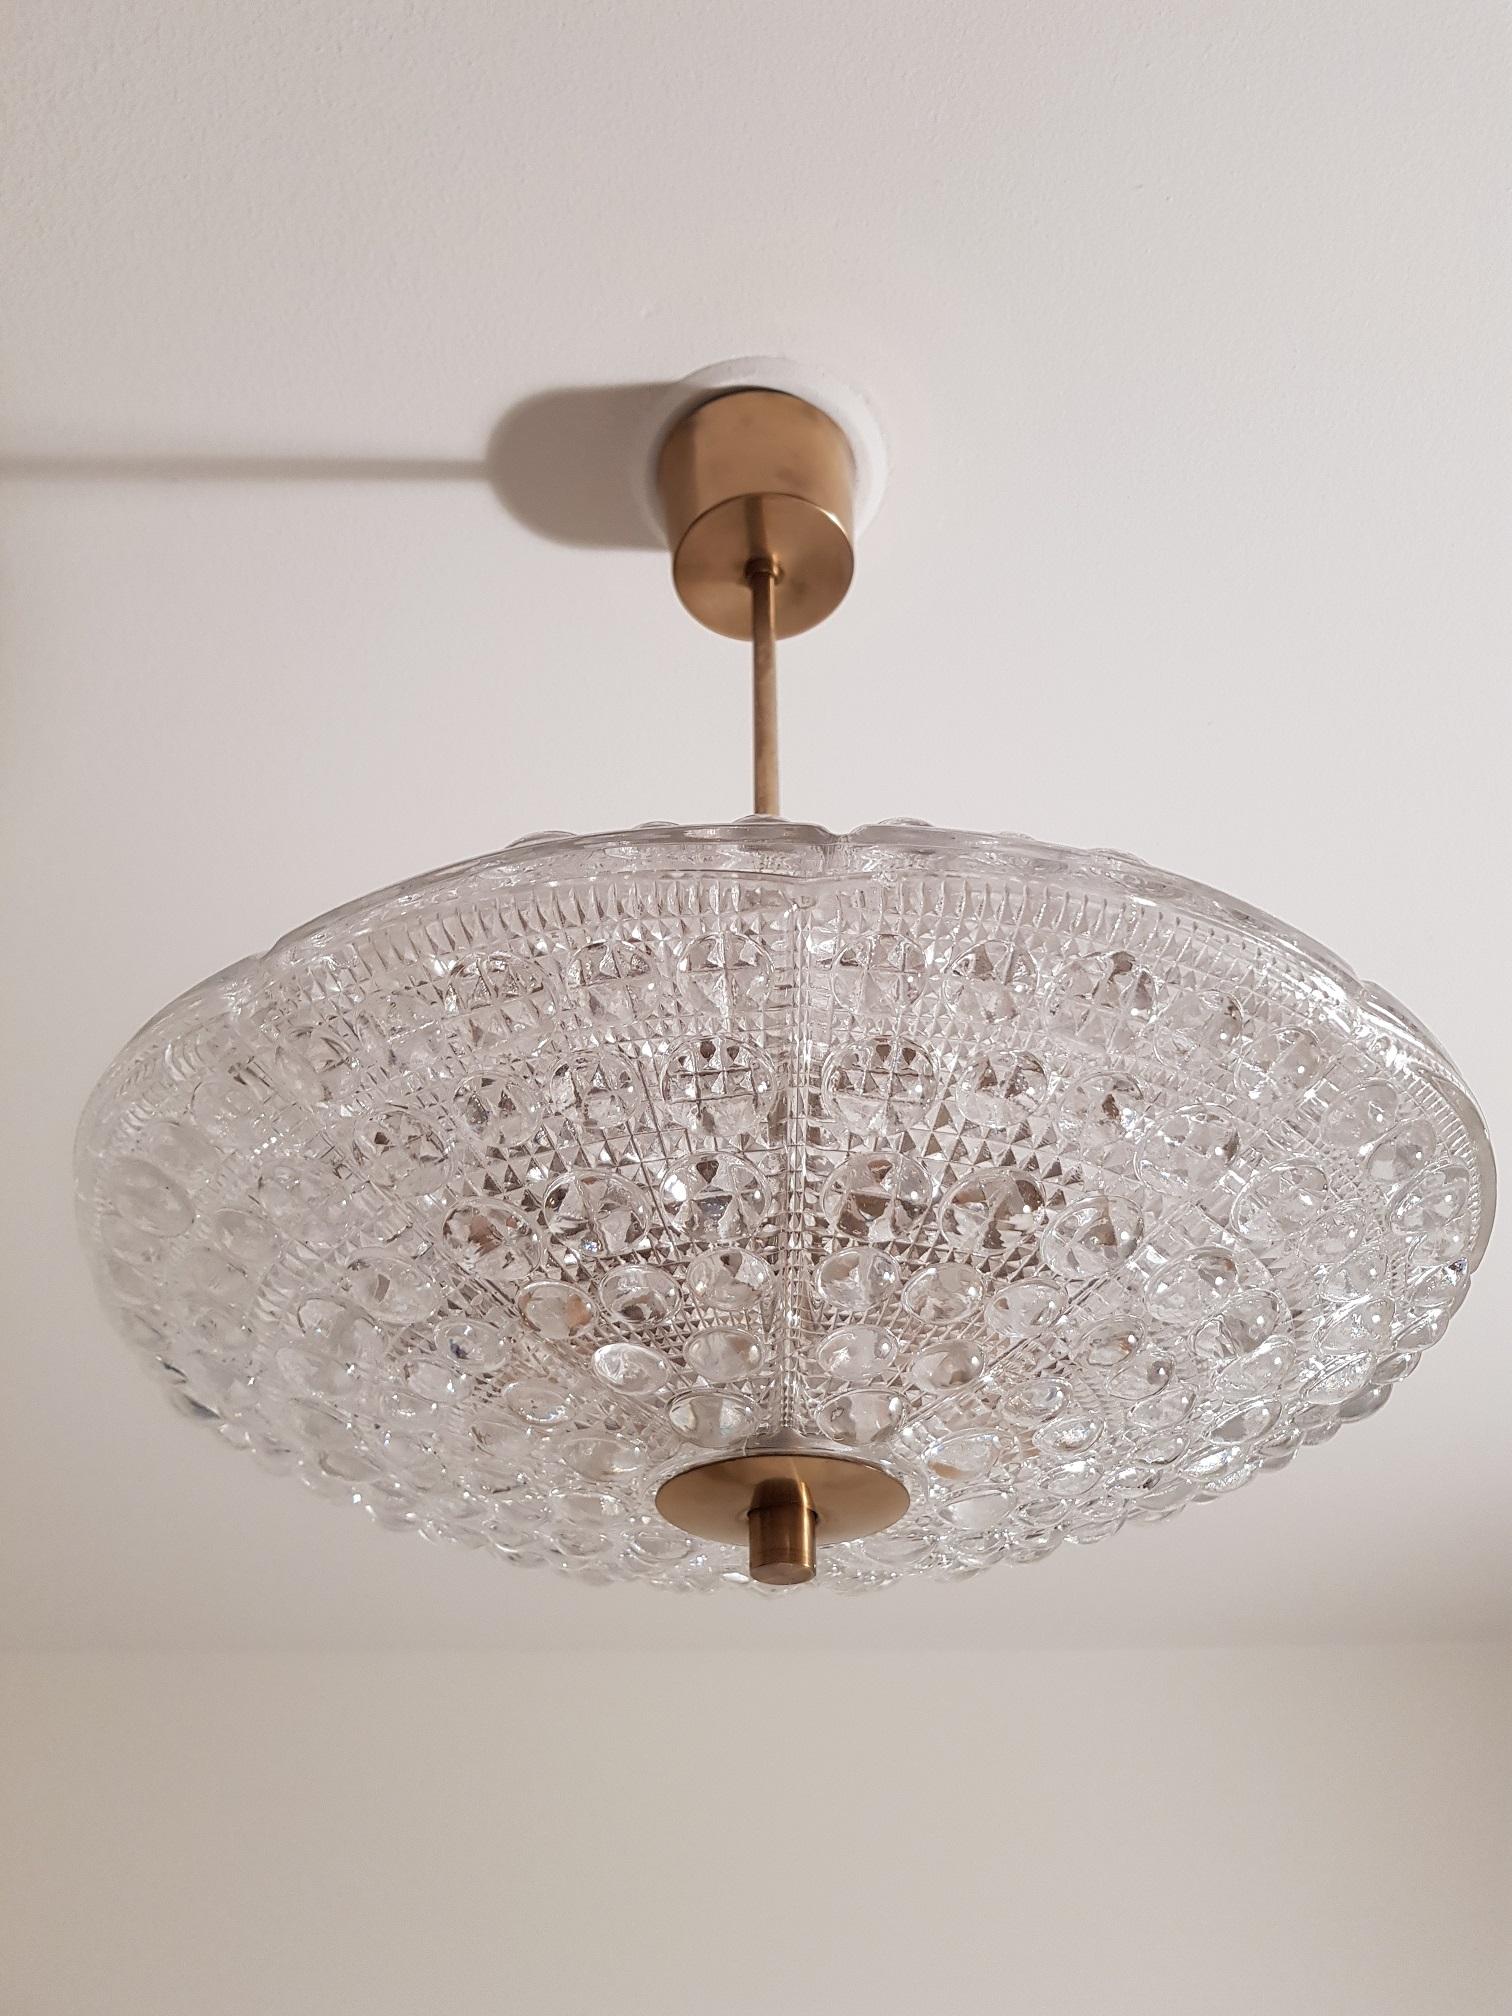 Carl Fagerlund Dual Disc Chandelier Brass and Glass 1960s, Orrefors Sweden For Sale 2